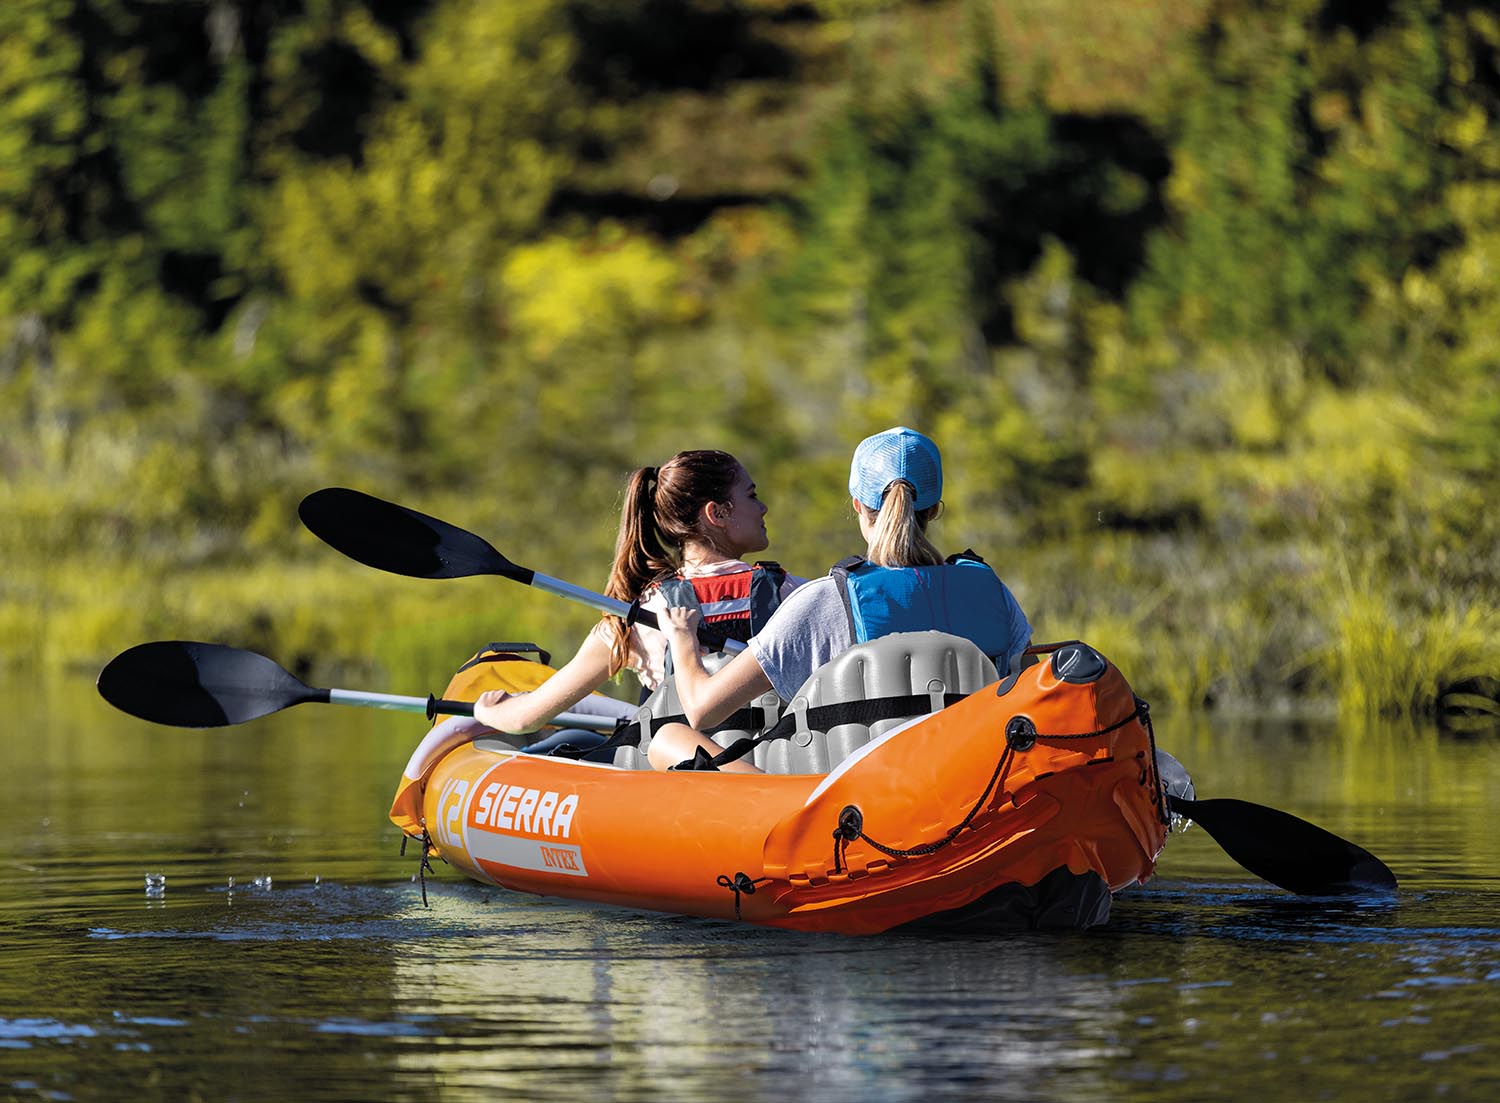 Intex Sierra K2 Inflatable Kayak with Oars and Hand Pump - image 3 of 12